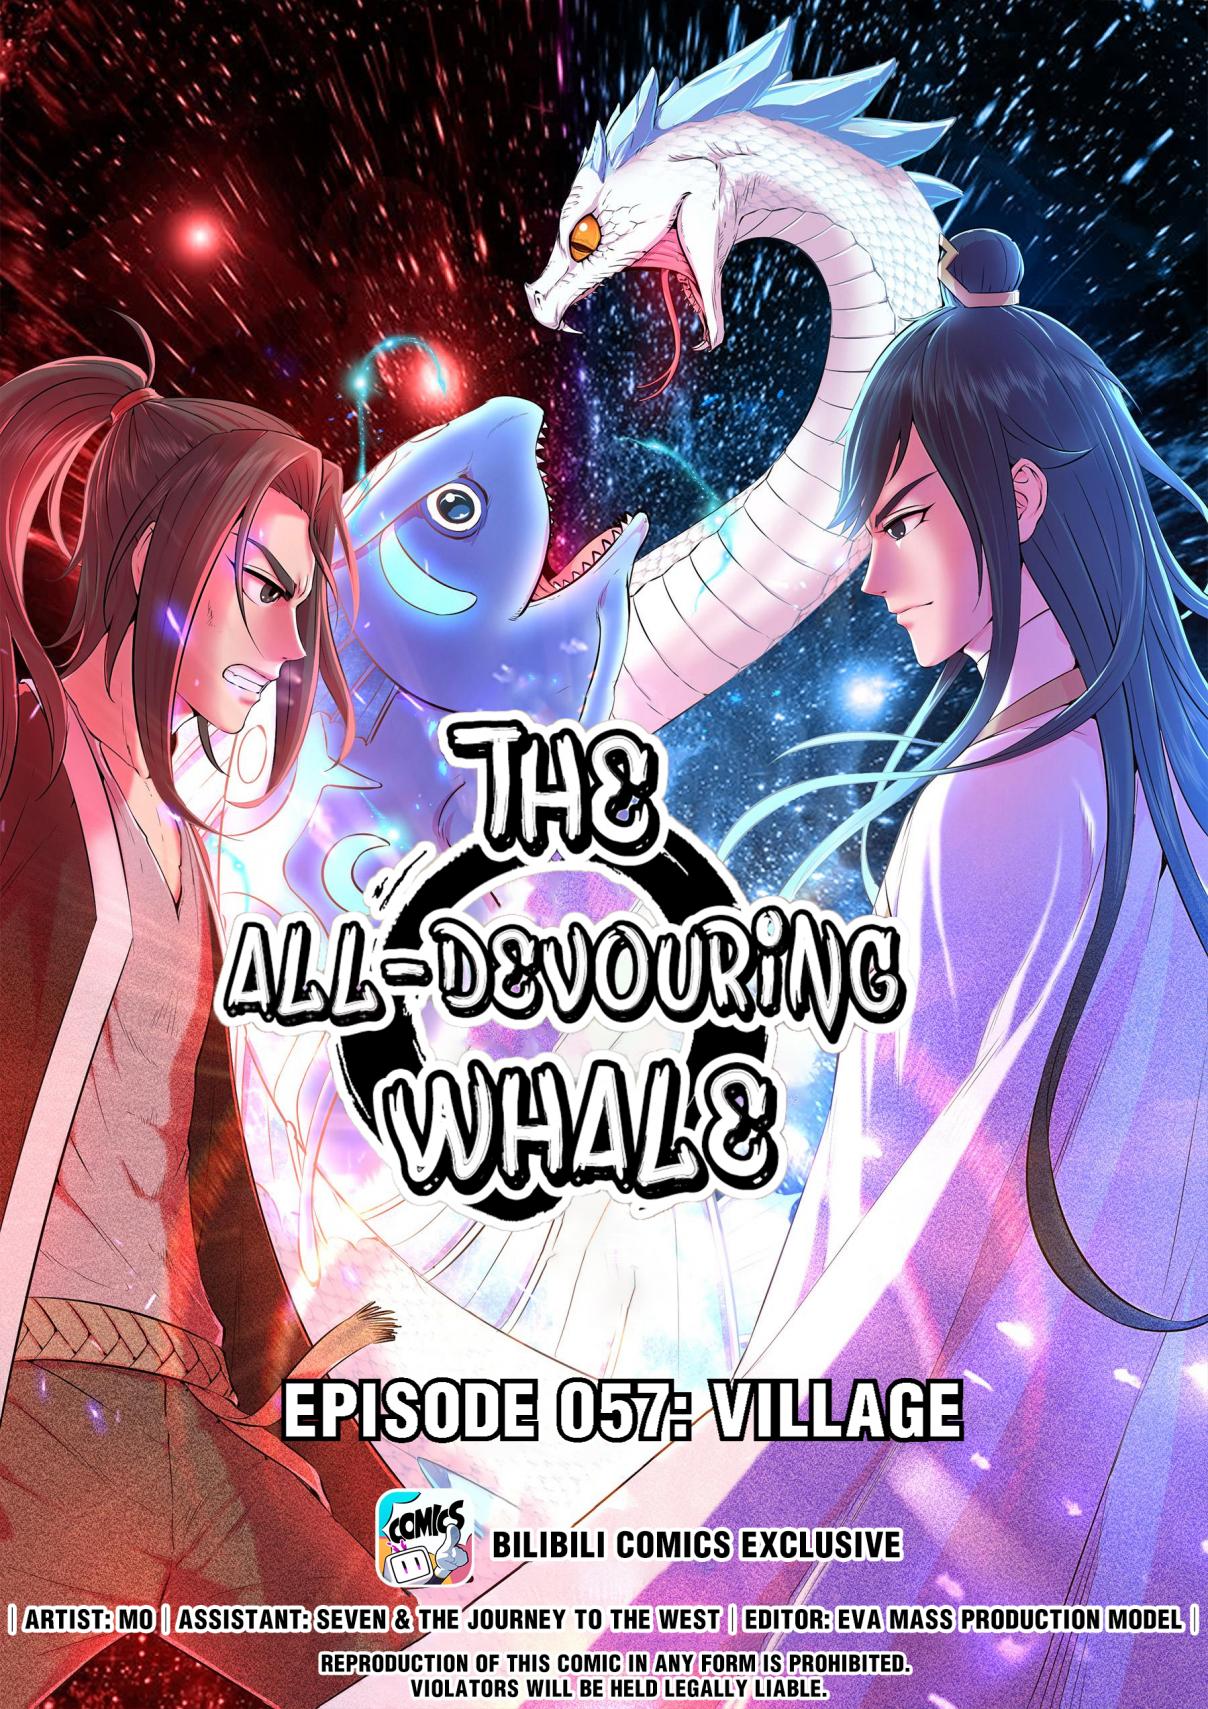 The All-devouring Whale 58 VILLAGE ENTRANCE REQUIREMENT